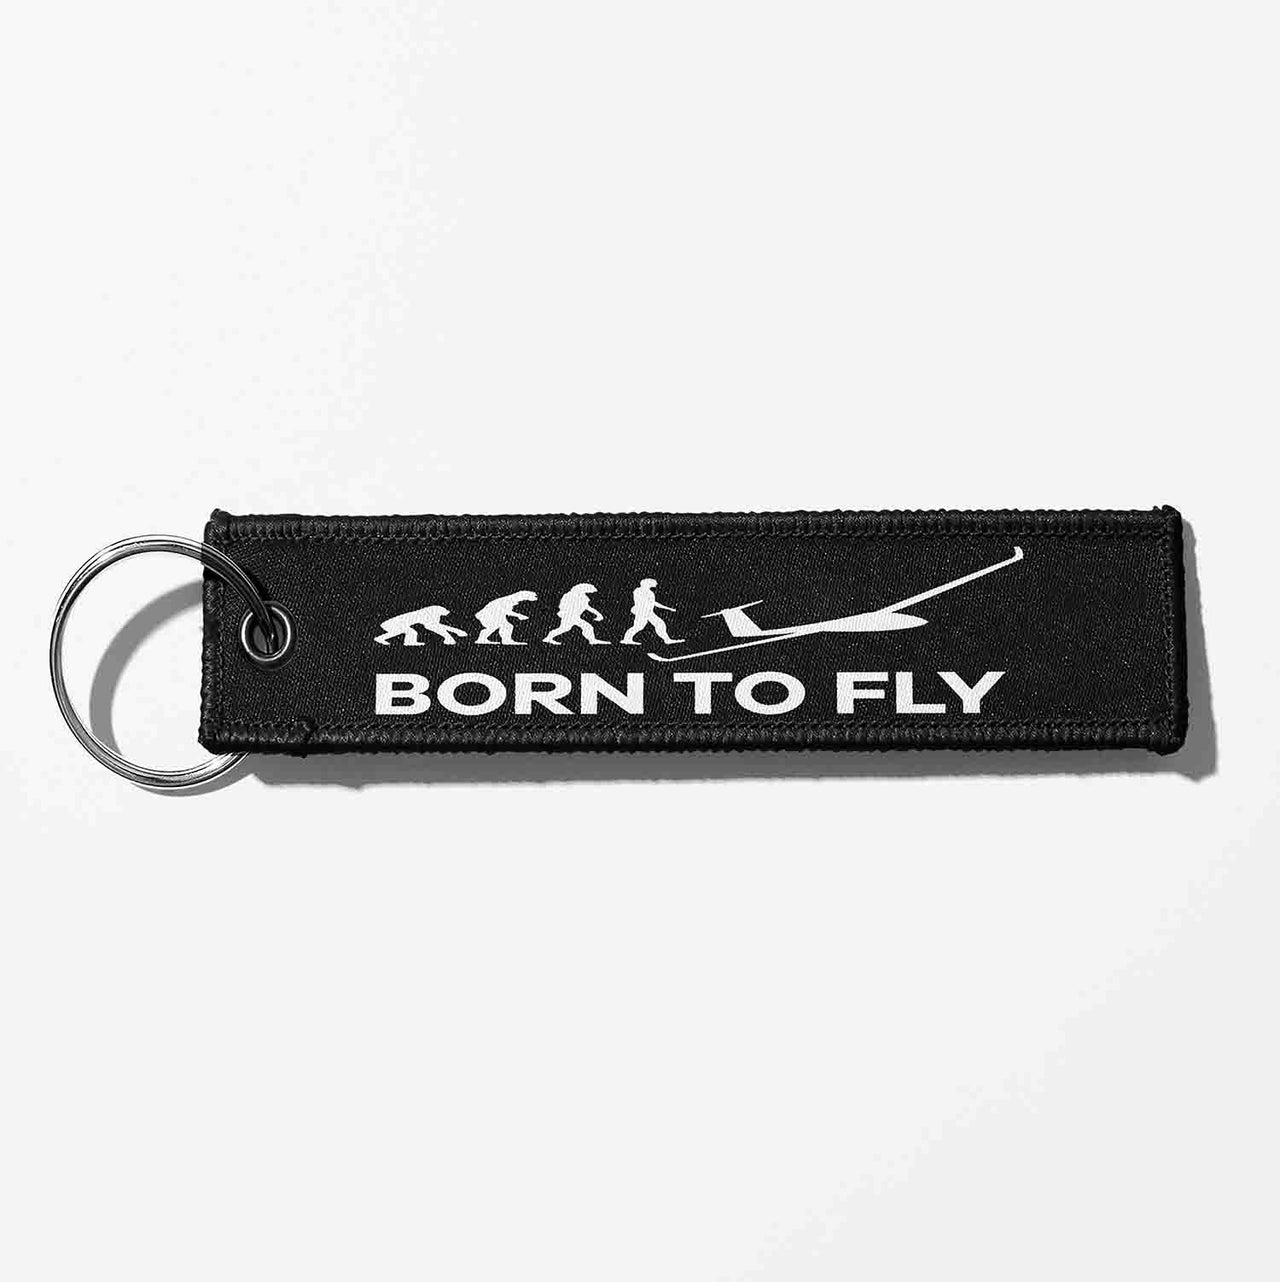 Born To Fly (Glider) Designed Key Chains